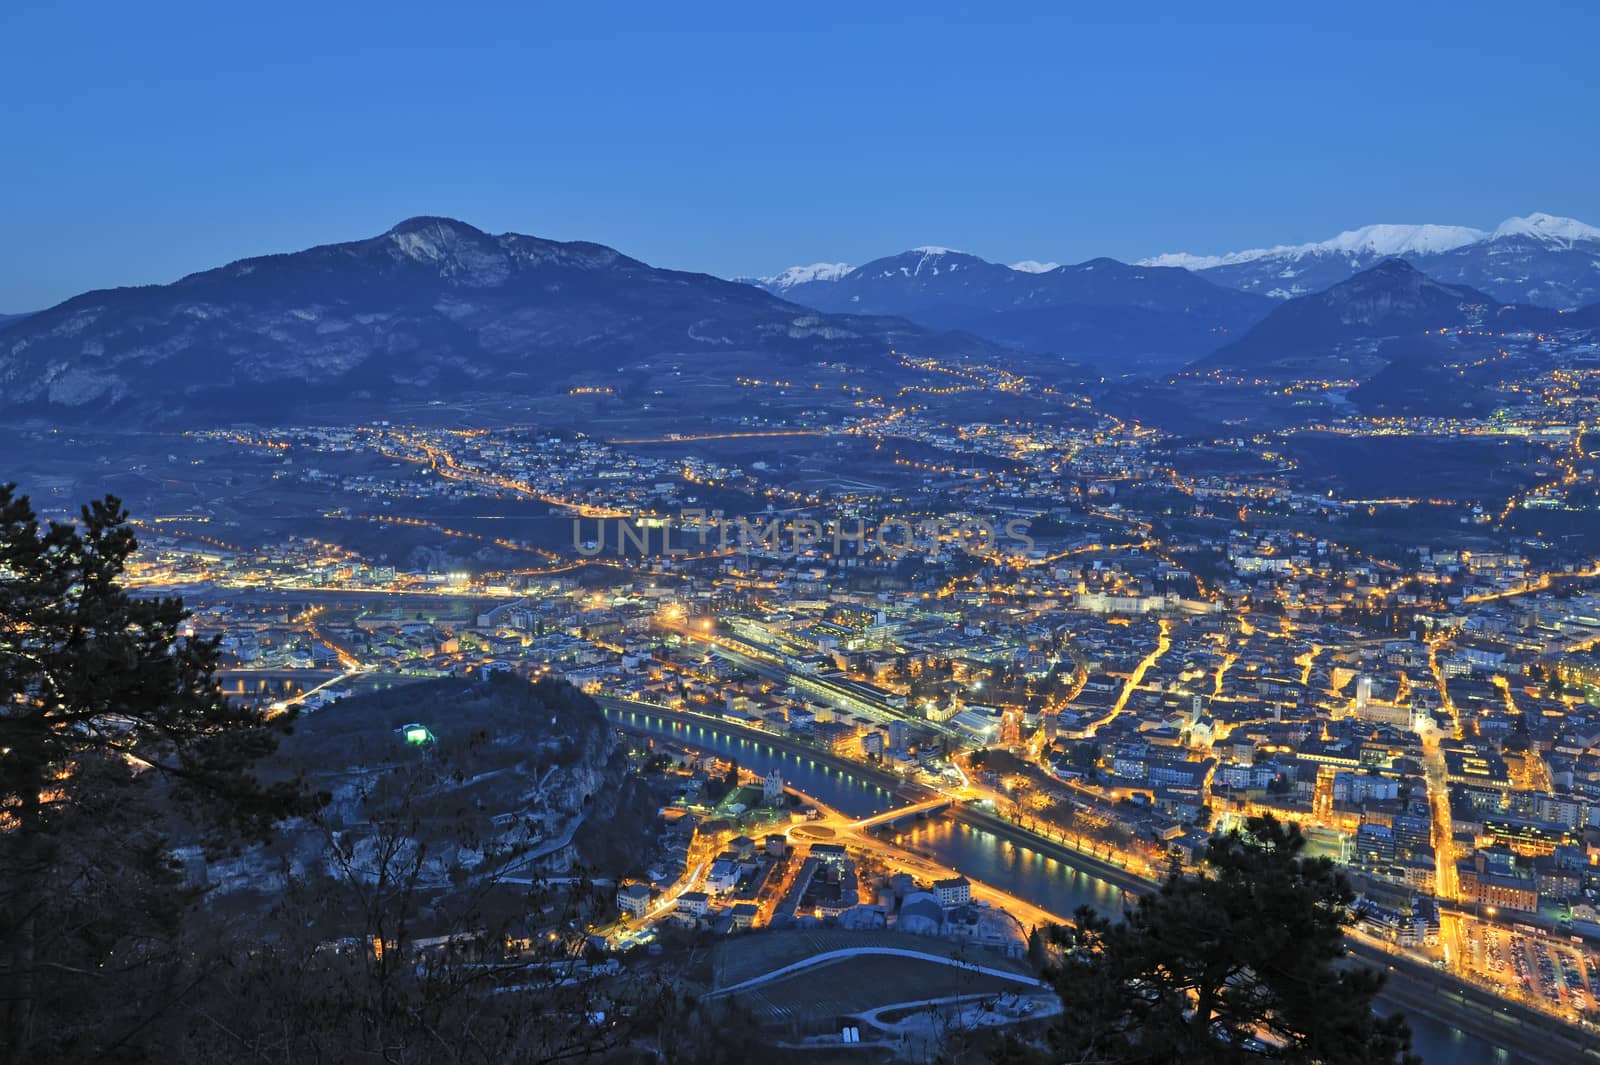 Overview of Trento in night time 